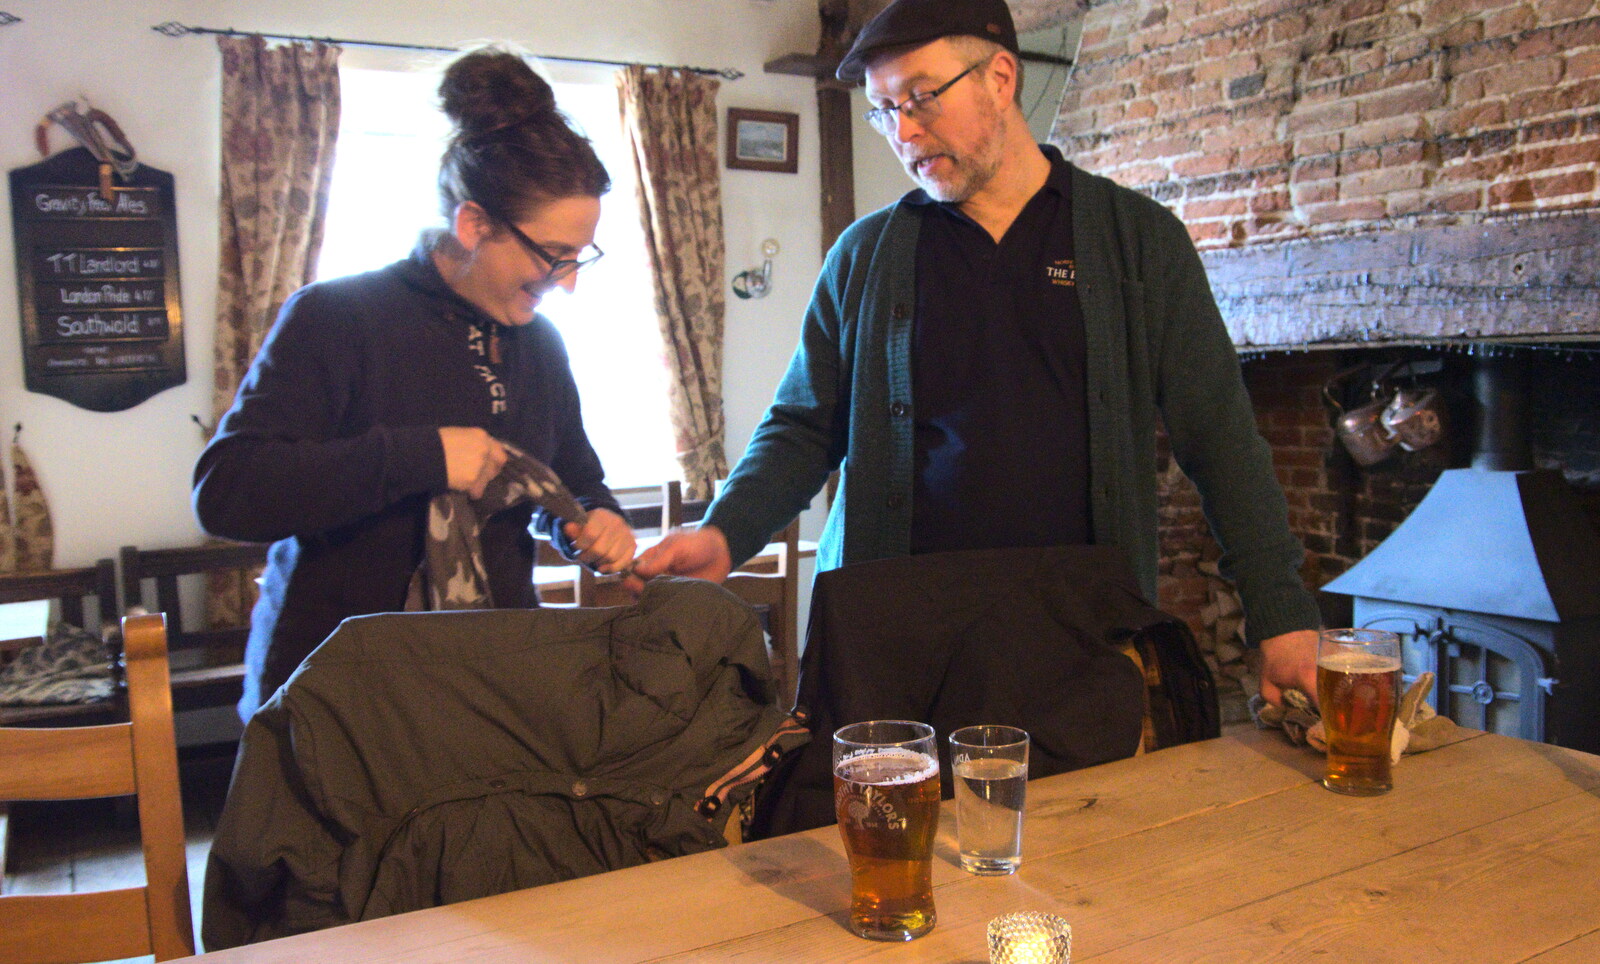 Suey and Marc from Another Walk to The Swan, Hoxne, Suffolk - 5th February 2023